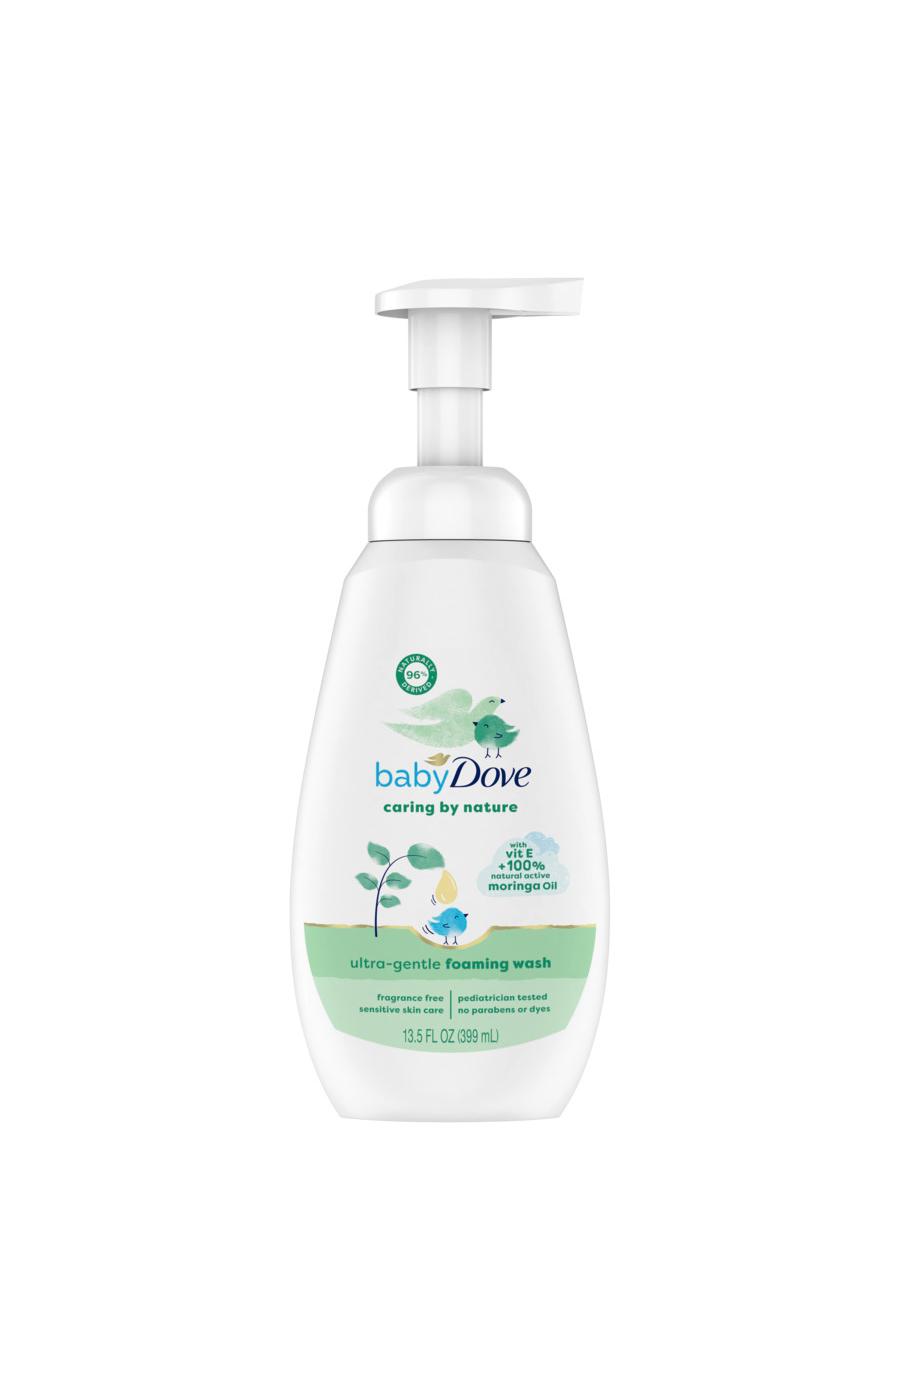 Baby Dove Ultra Gentle Foaming Wash with Vitamin E and 100% Natural Moringa Oil; image 1 of 5